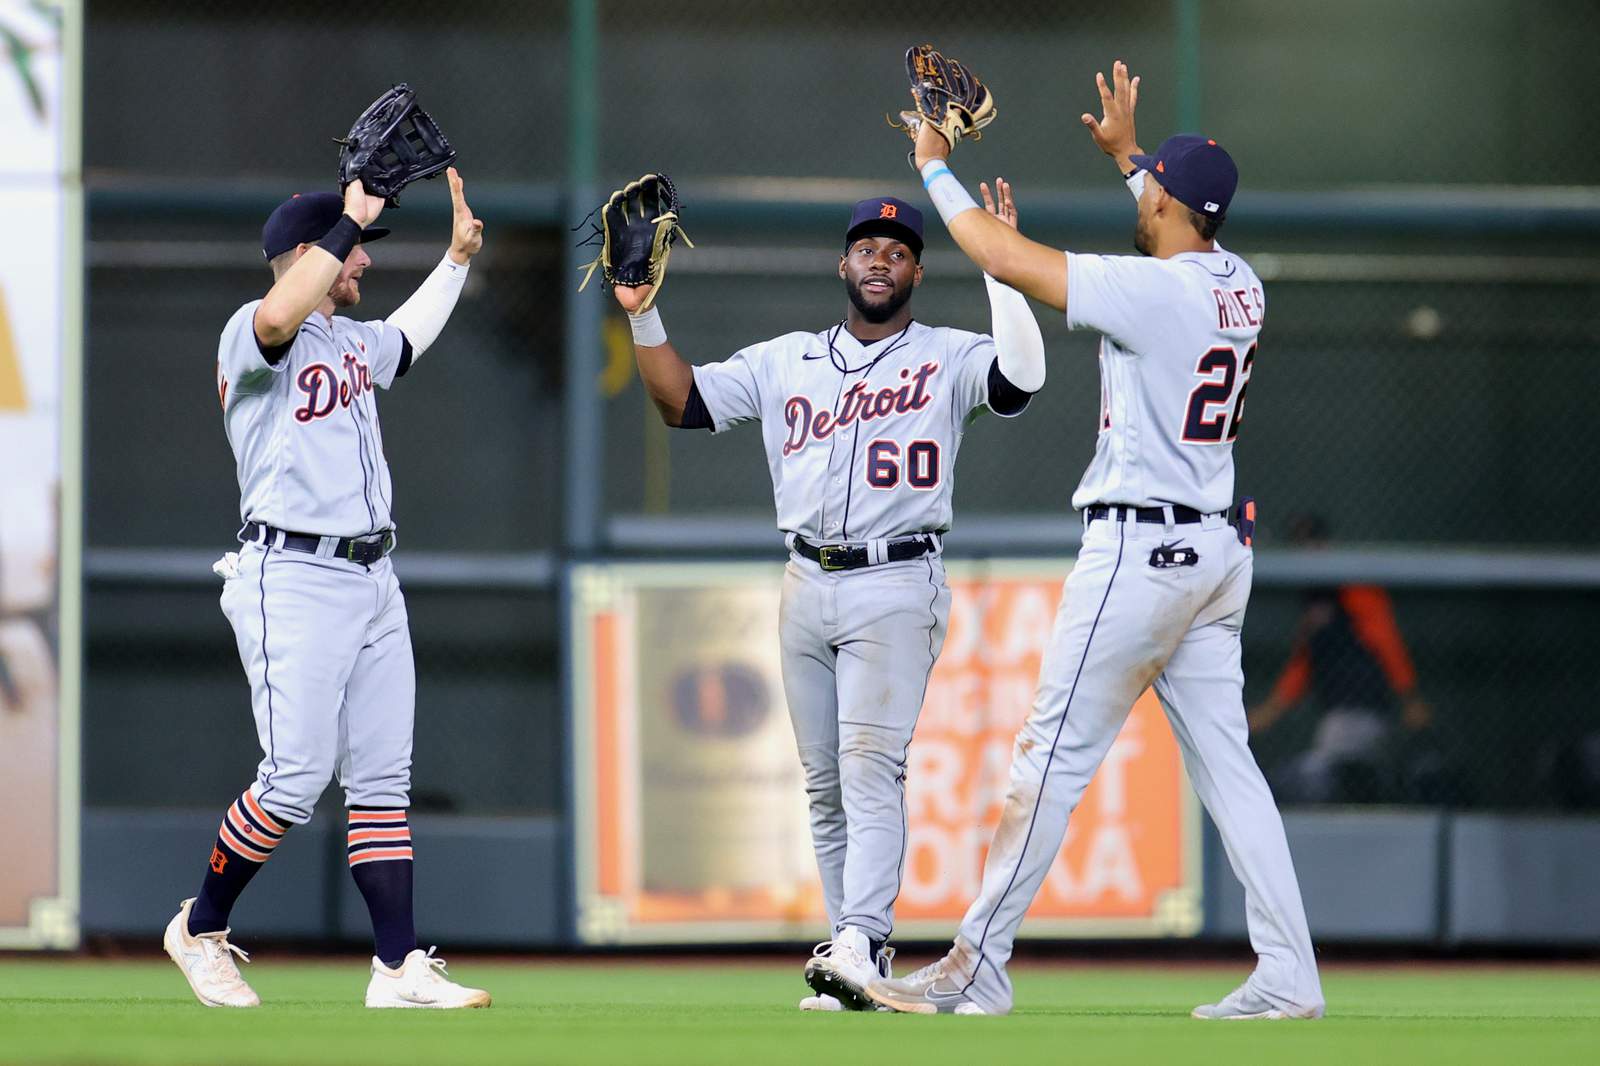 Sweeping the Astros was the most fun Detroit Tigers series since 2016 (I think)